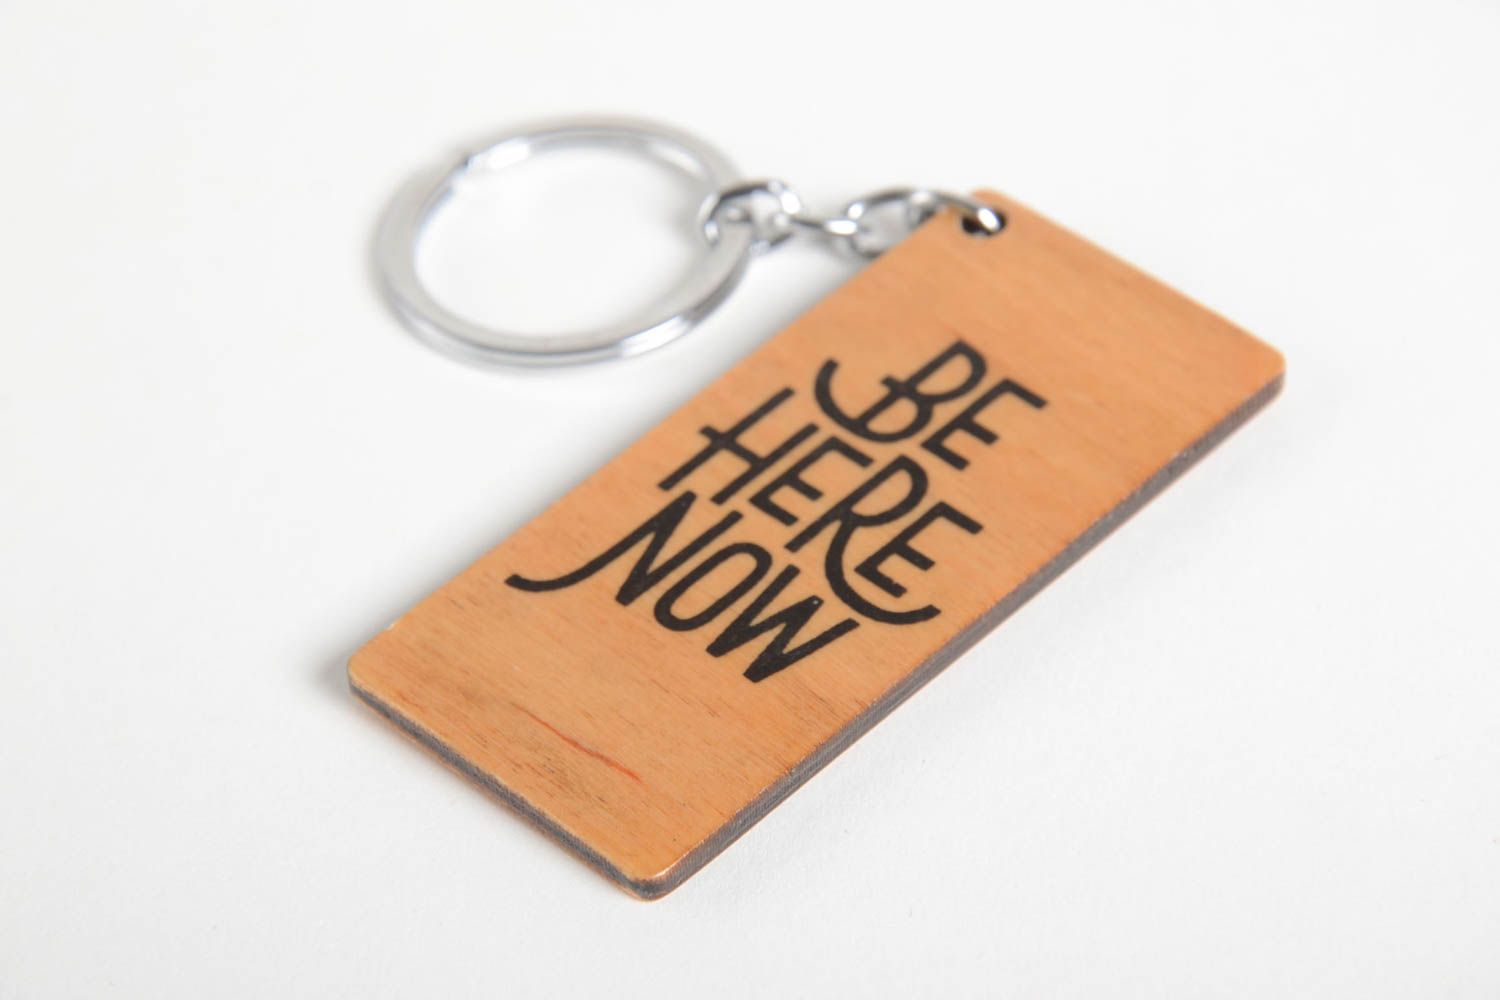 Handmade wooden keychain key rings wooden accessories souvenir ideas cool gifts photo 3